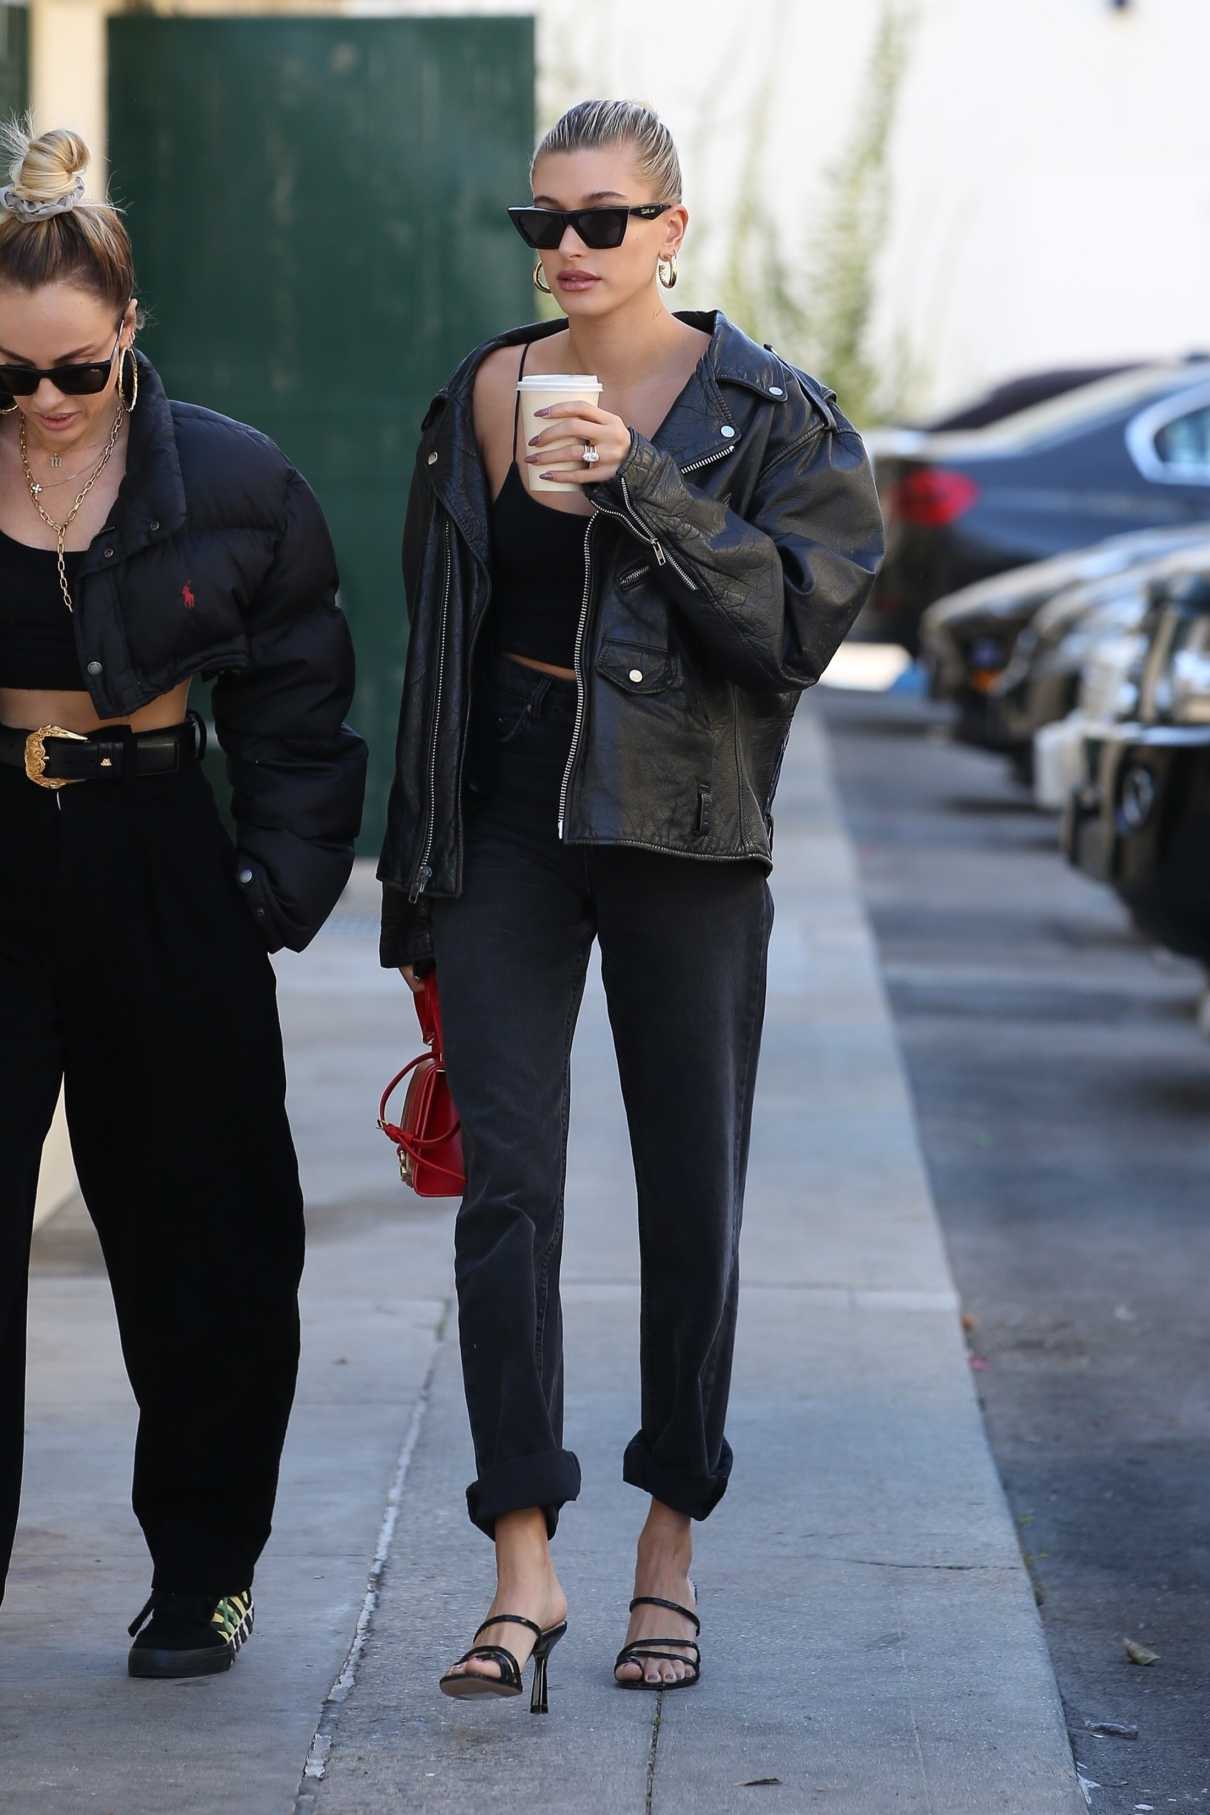 Hailey Baldwin in a Black Leather Jacket Was Seen Out with Her Stylist ...